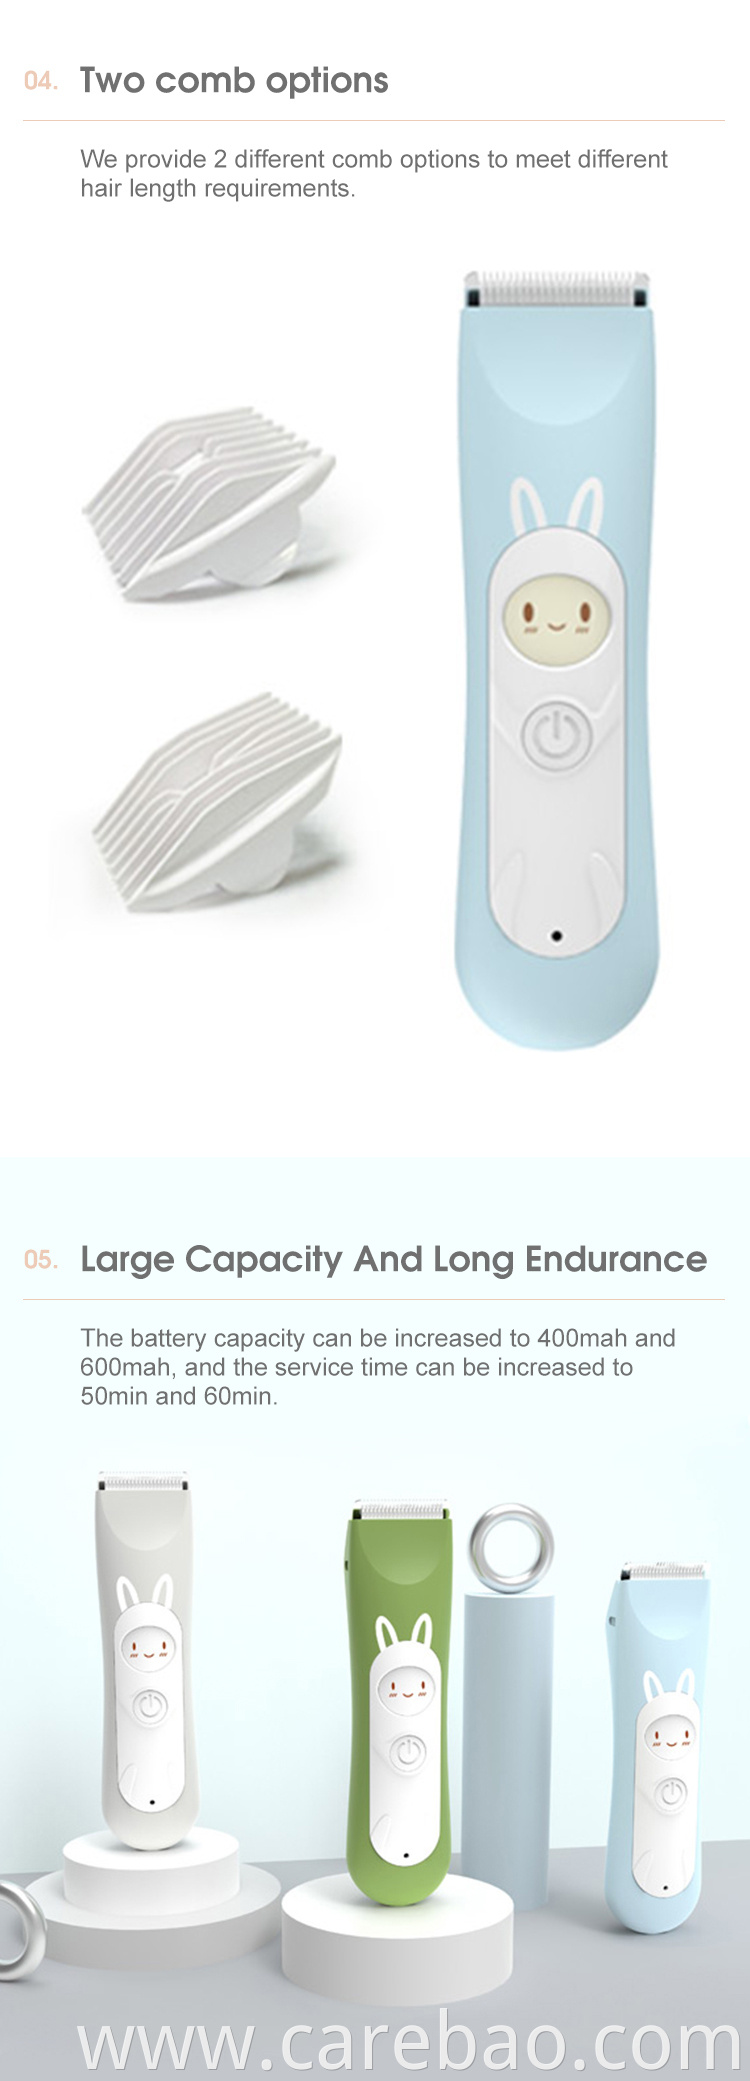 Custom Design Waterproof Carebao Electric Body Clipper Trimmer For Baby With Ceramic Stainless Steel Blade In China Cheap Price